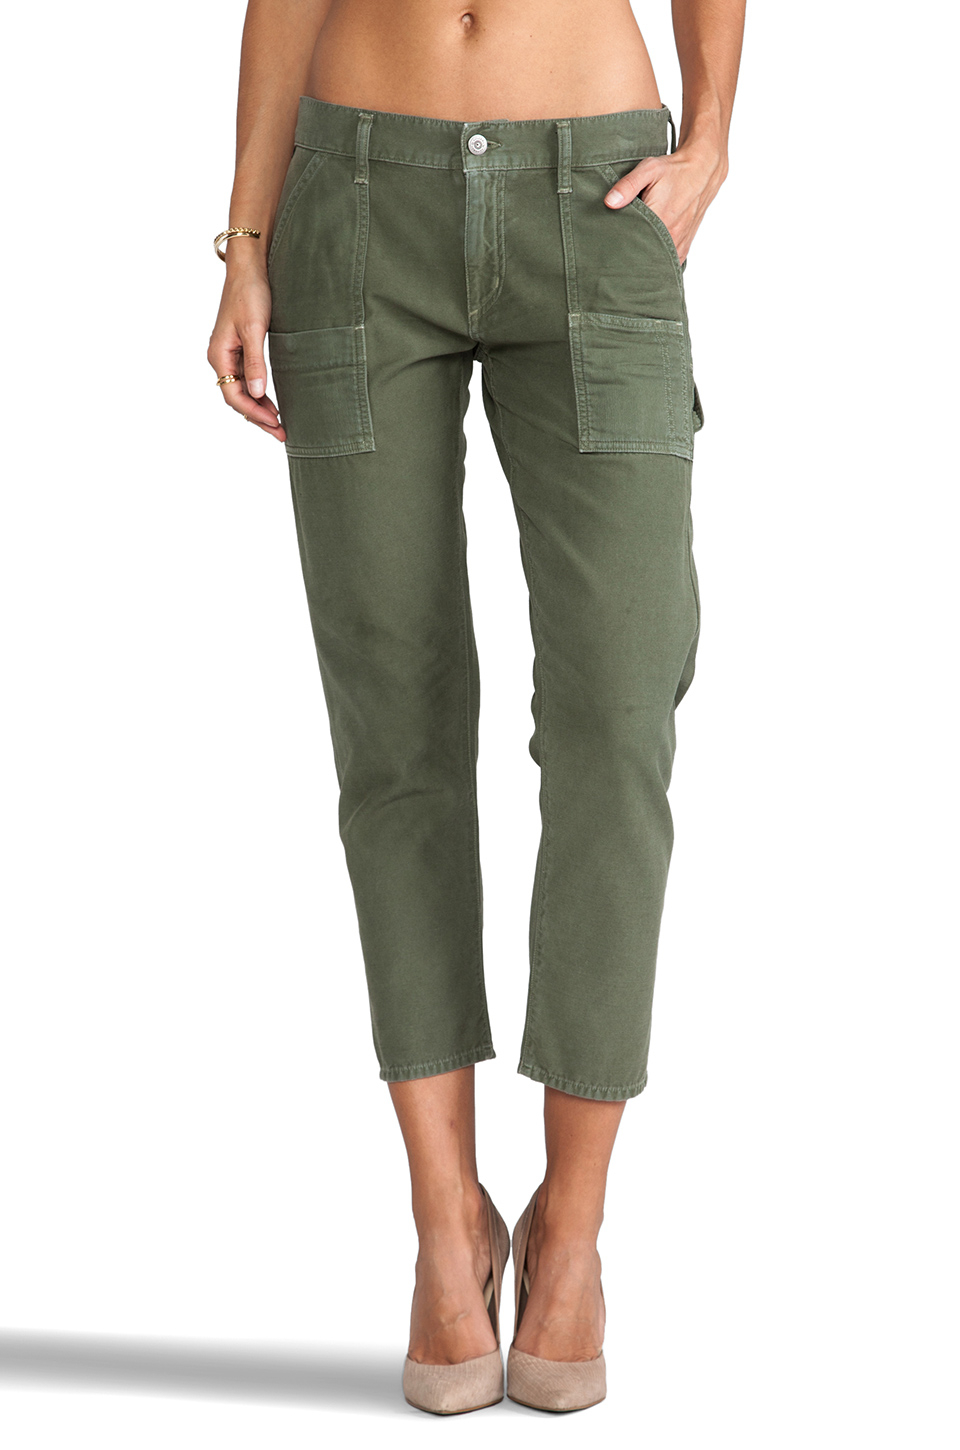 citizens of humanity leah cargo pants